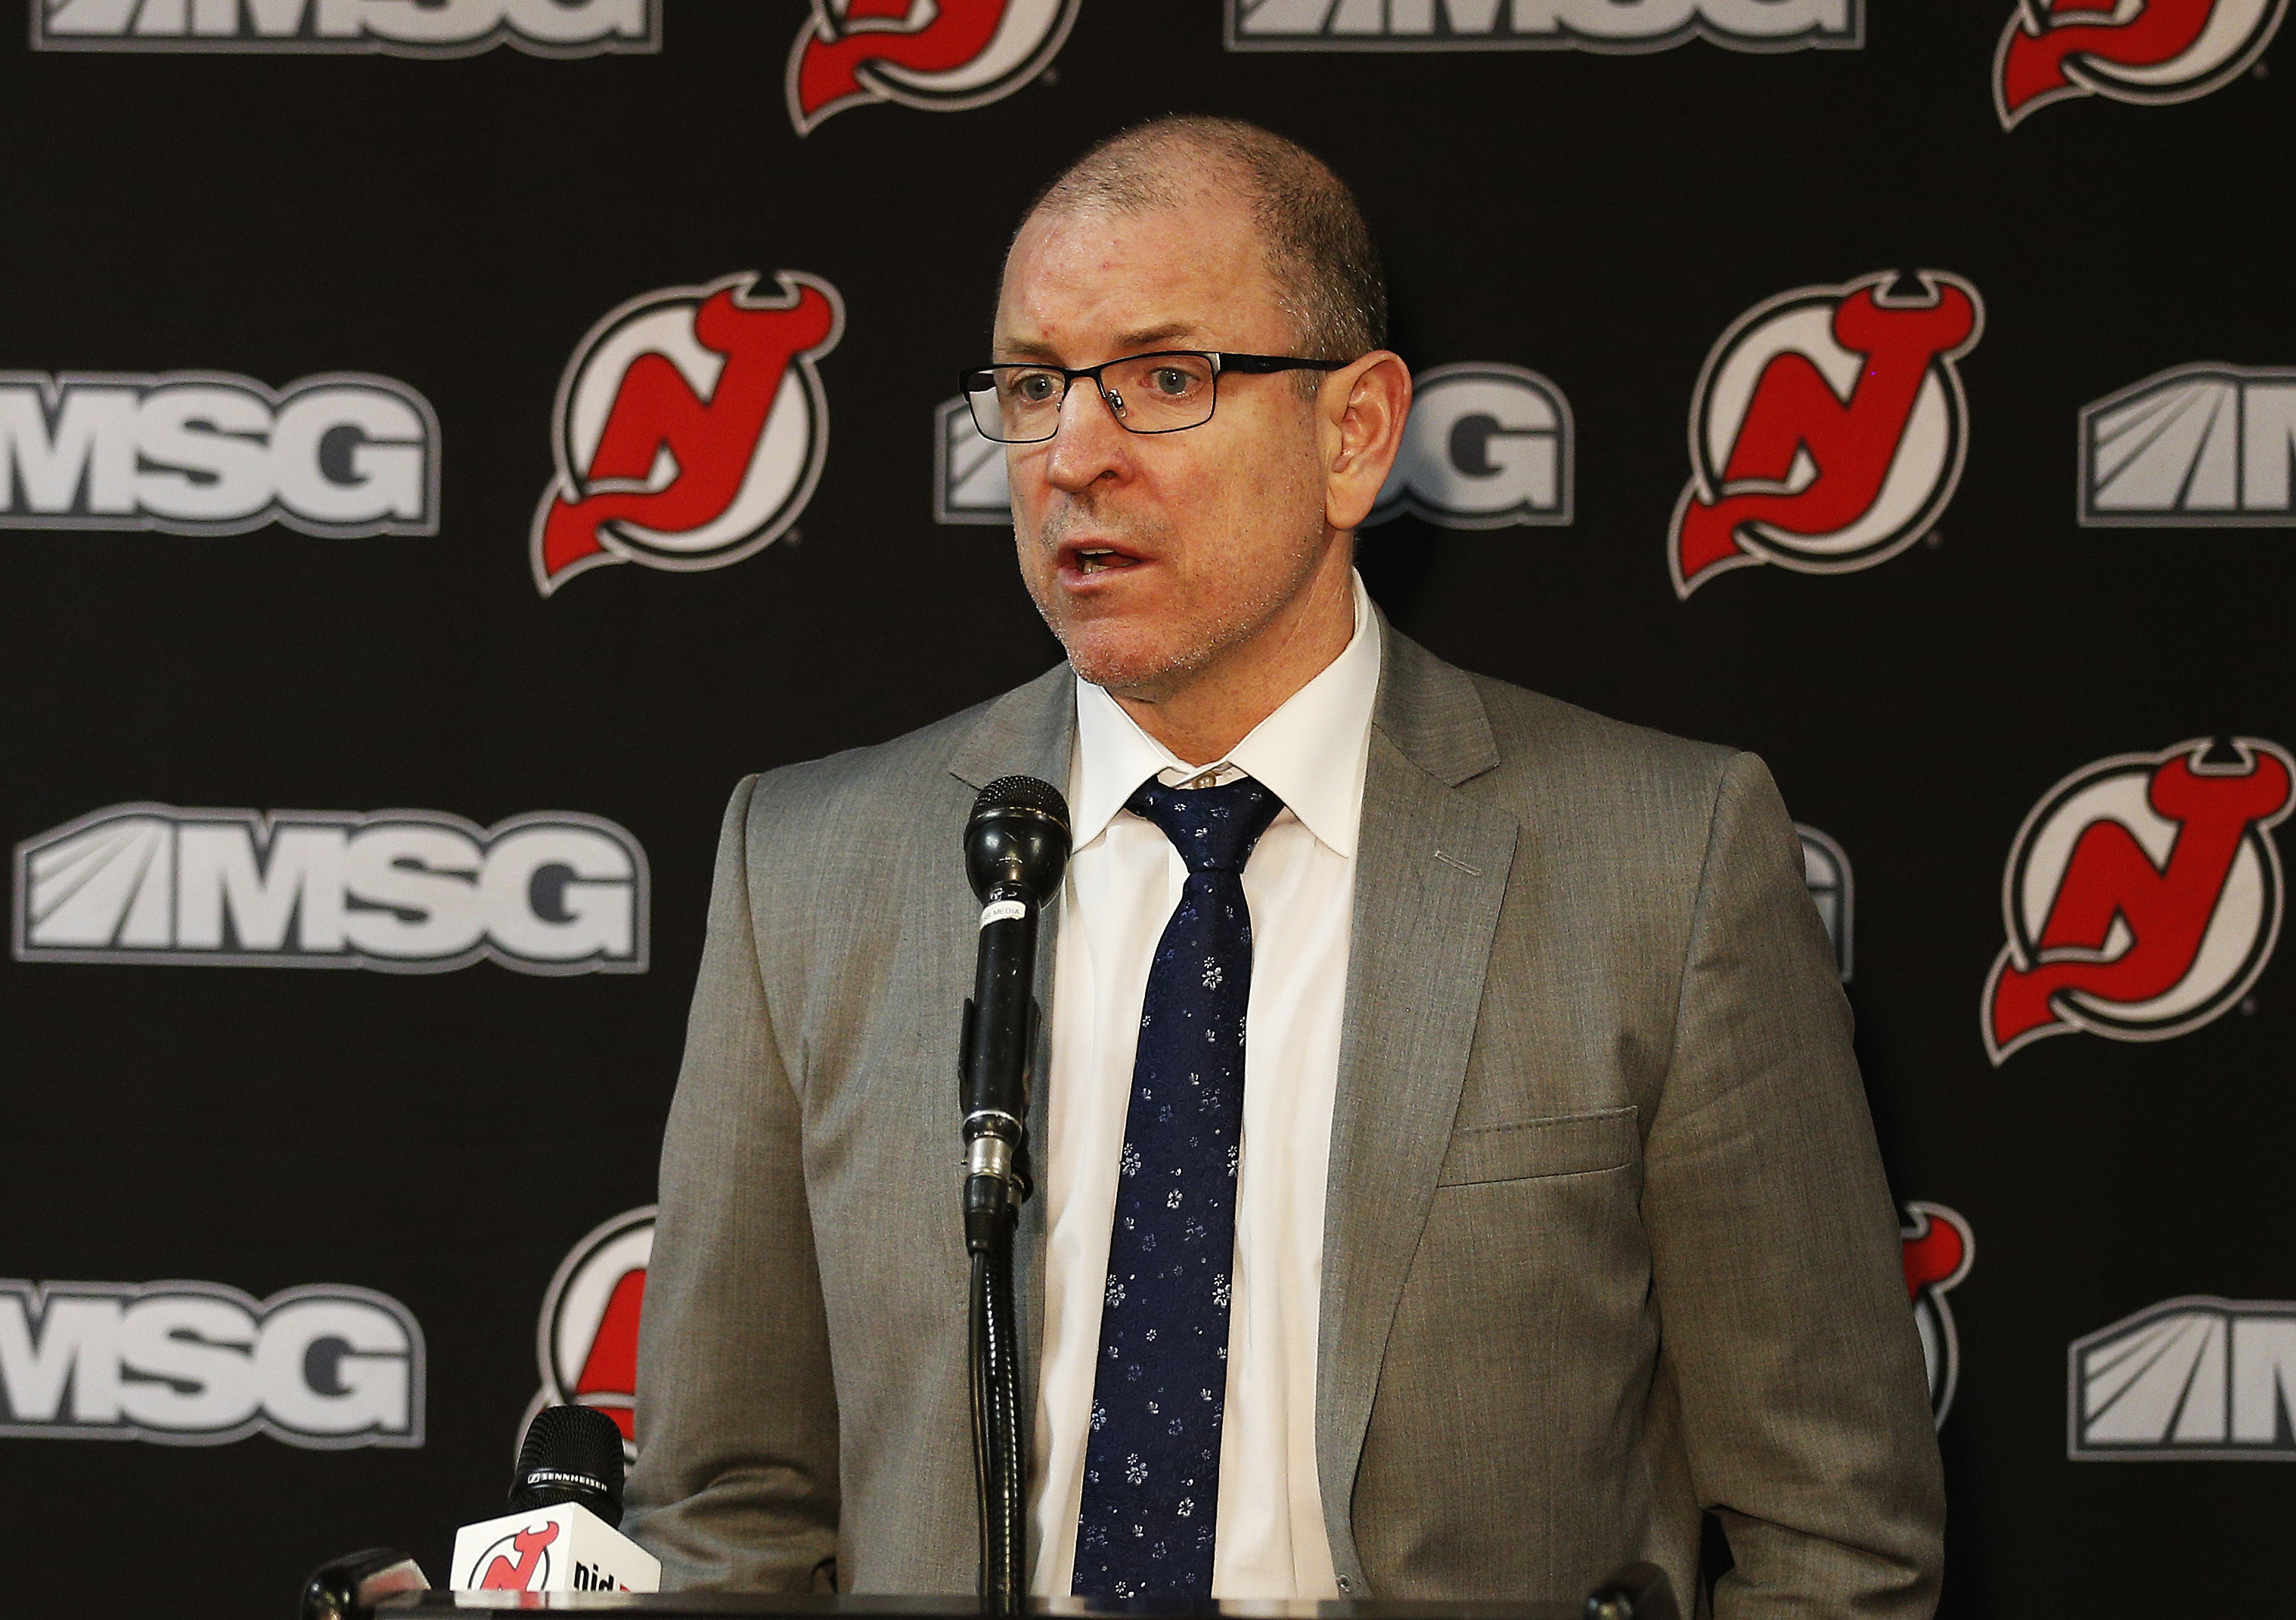 New Jersey Devils Interim general manager Tom Fitzgerald addresses the media after the Devils traded Blake Coleman prior to the game against the Columbus Blue Jackets at the Prudential Center on February 16, 2020 in Newark, New Jersey.